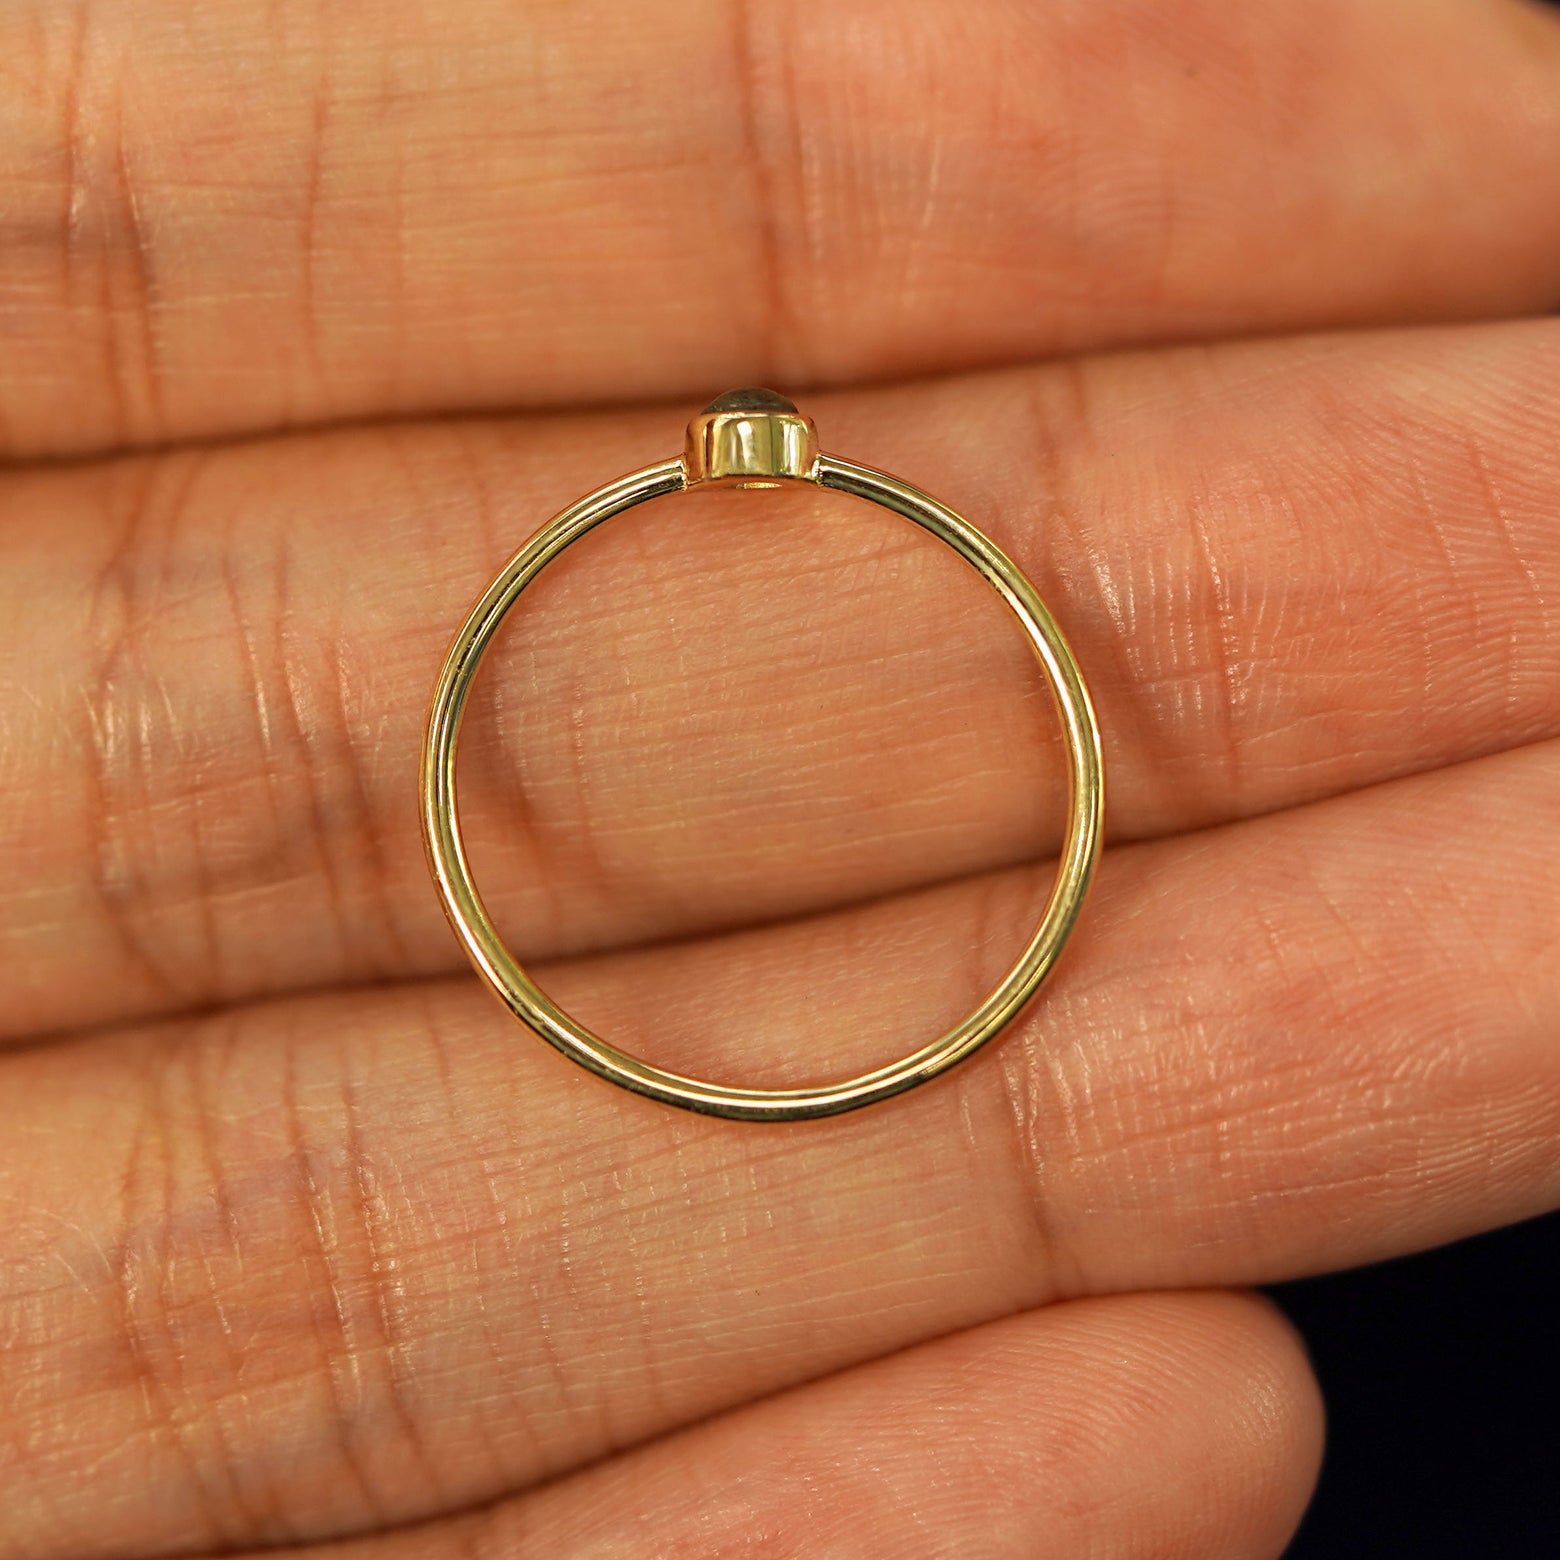 A yellow gold Labradorite Ring in a model's palm showing the thickness of the band